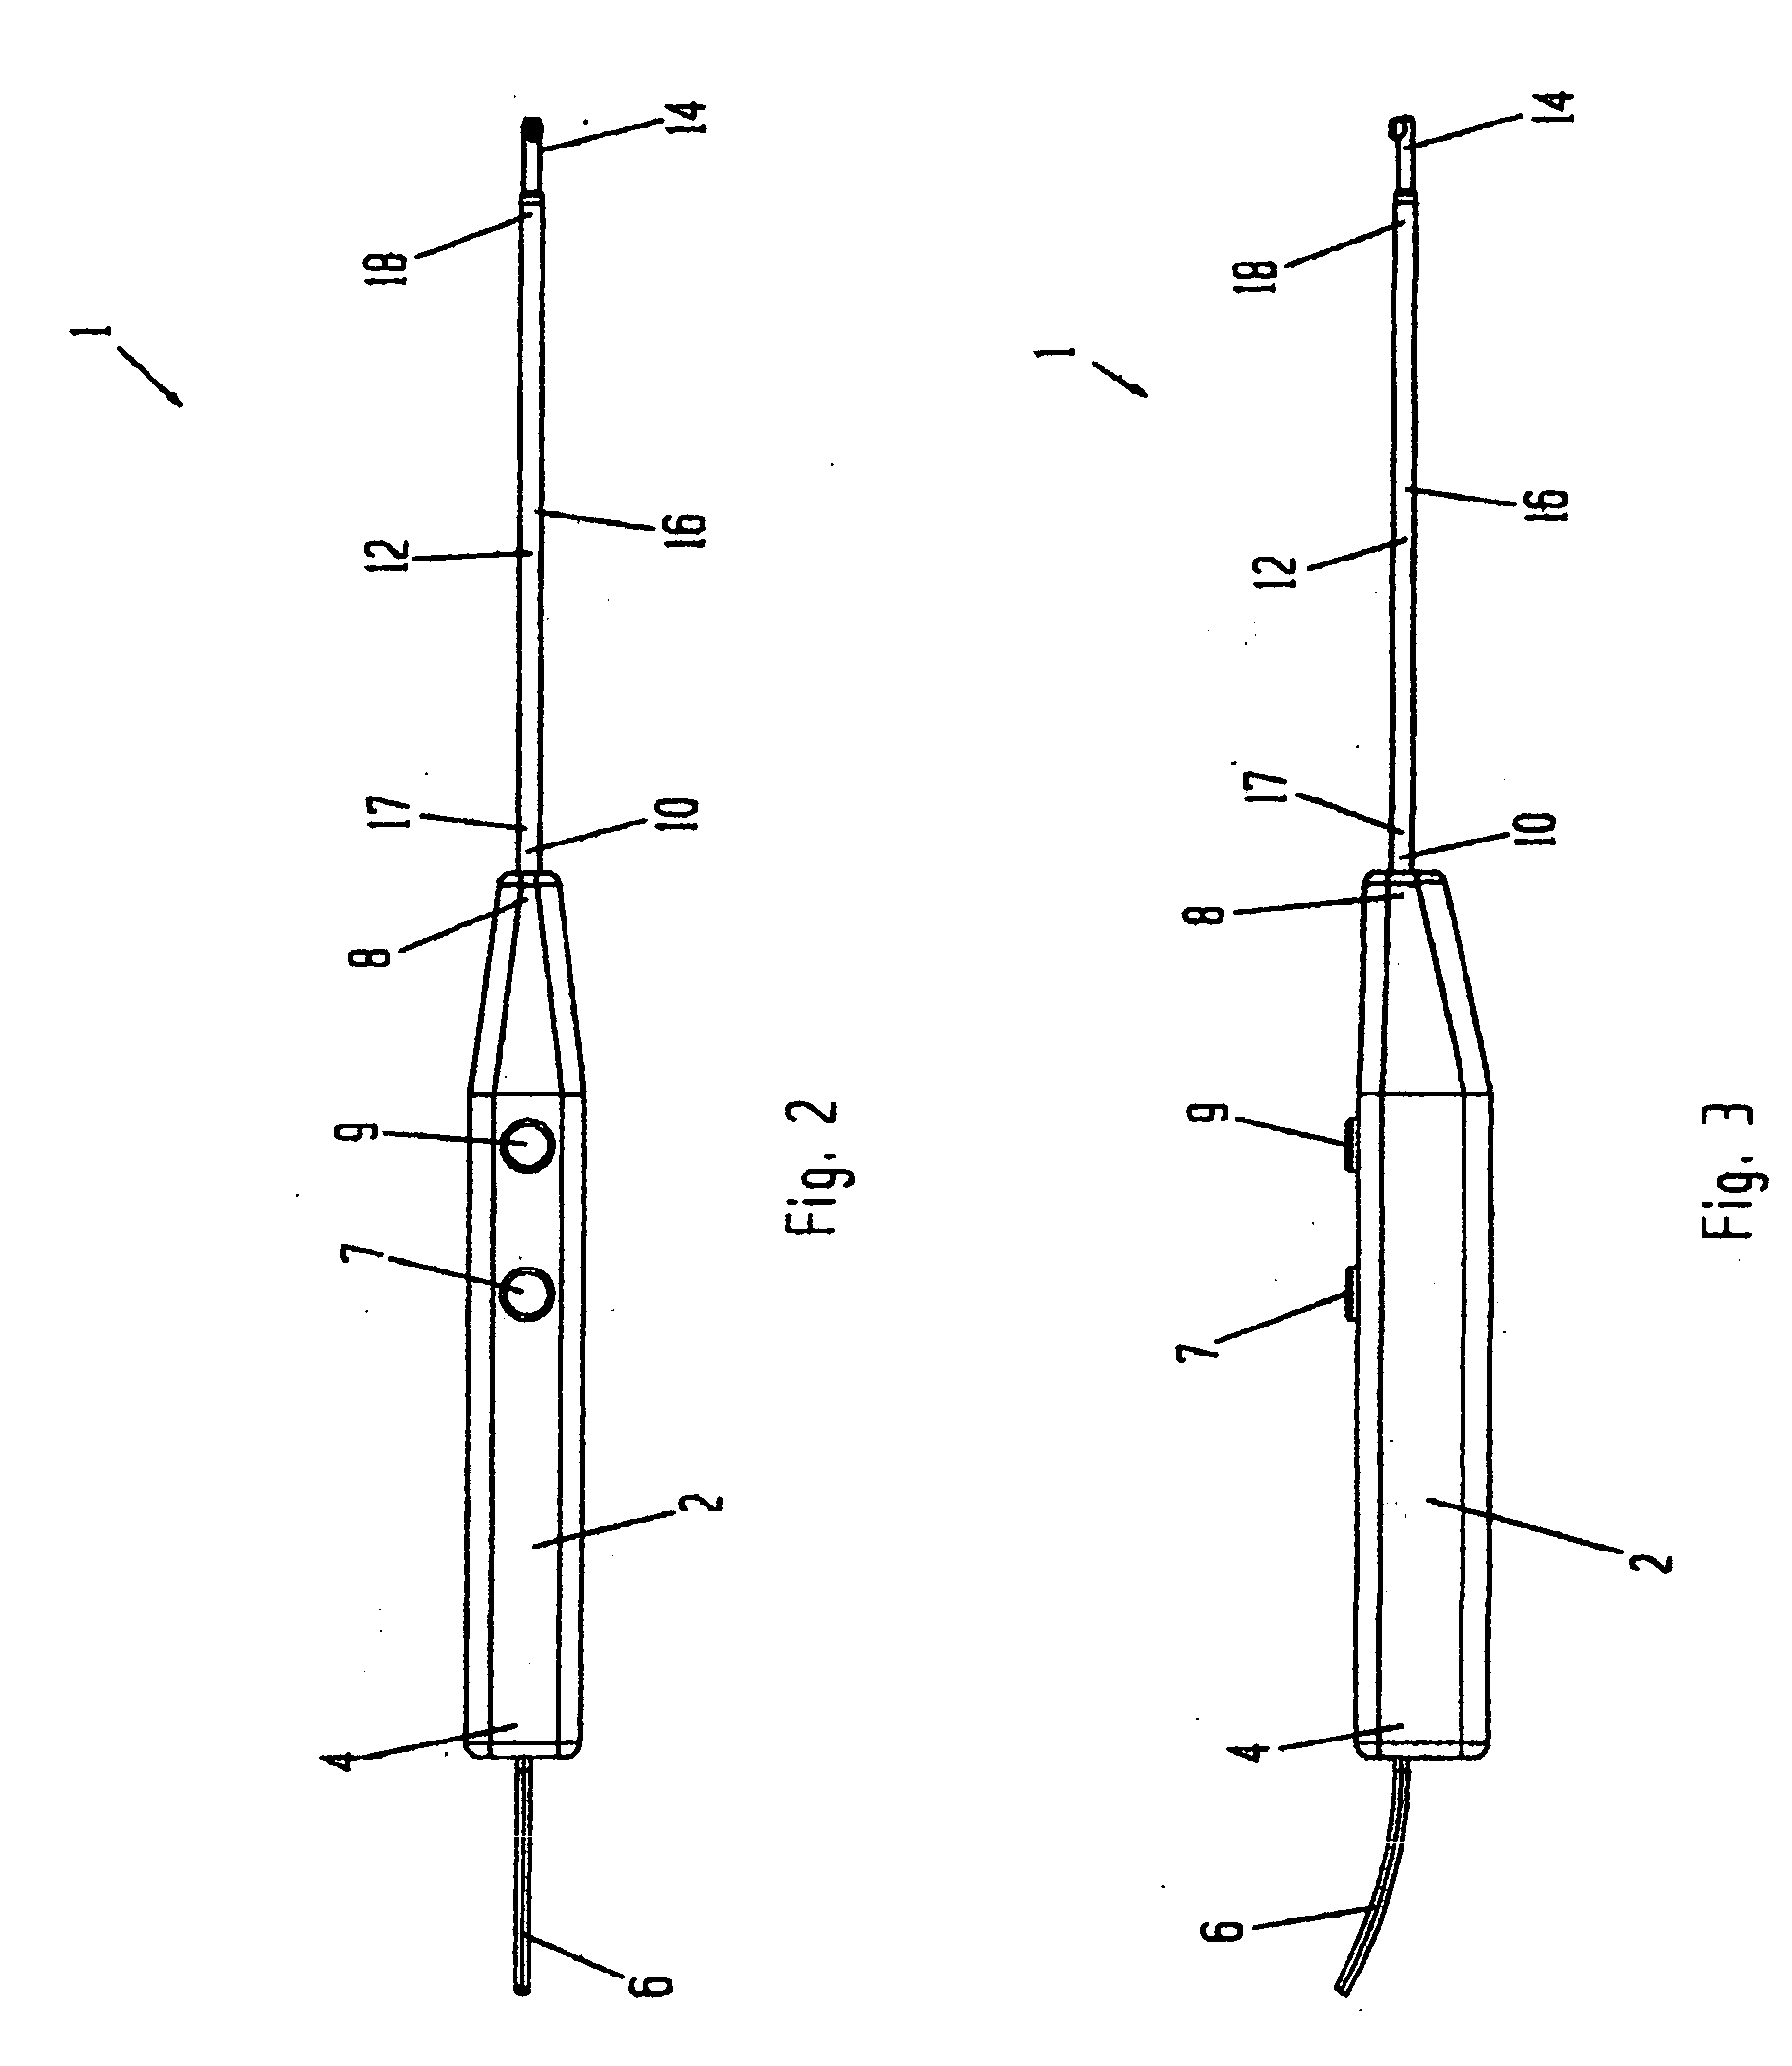 Electrosurgical device with floating-potential electrodes